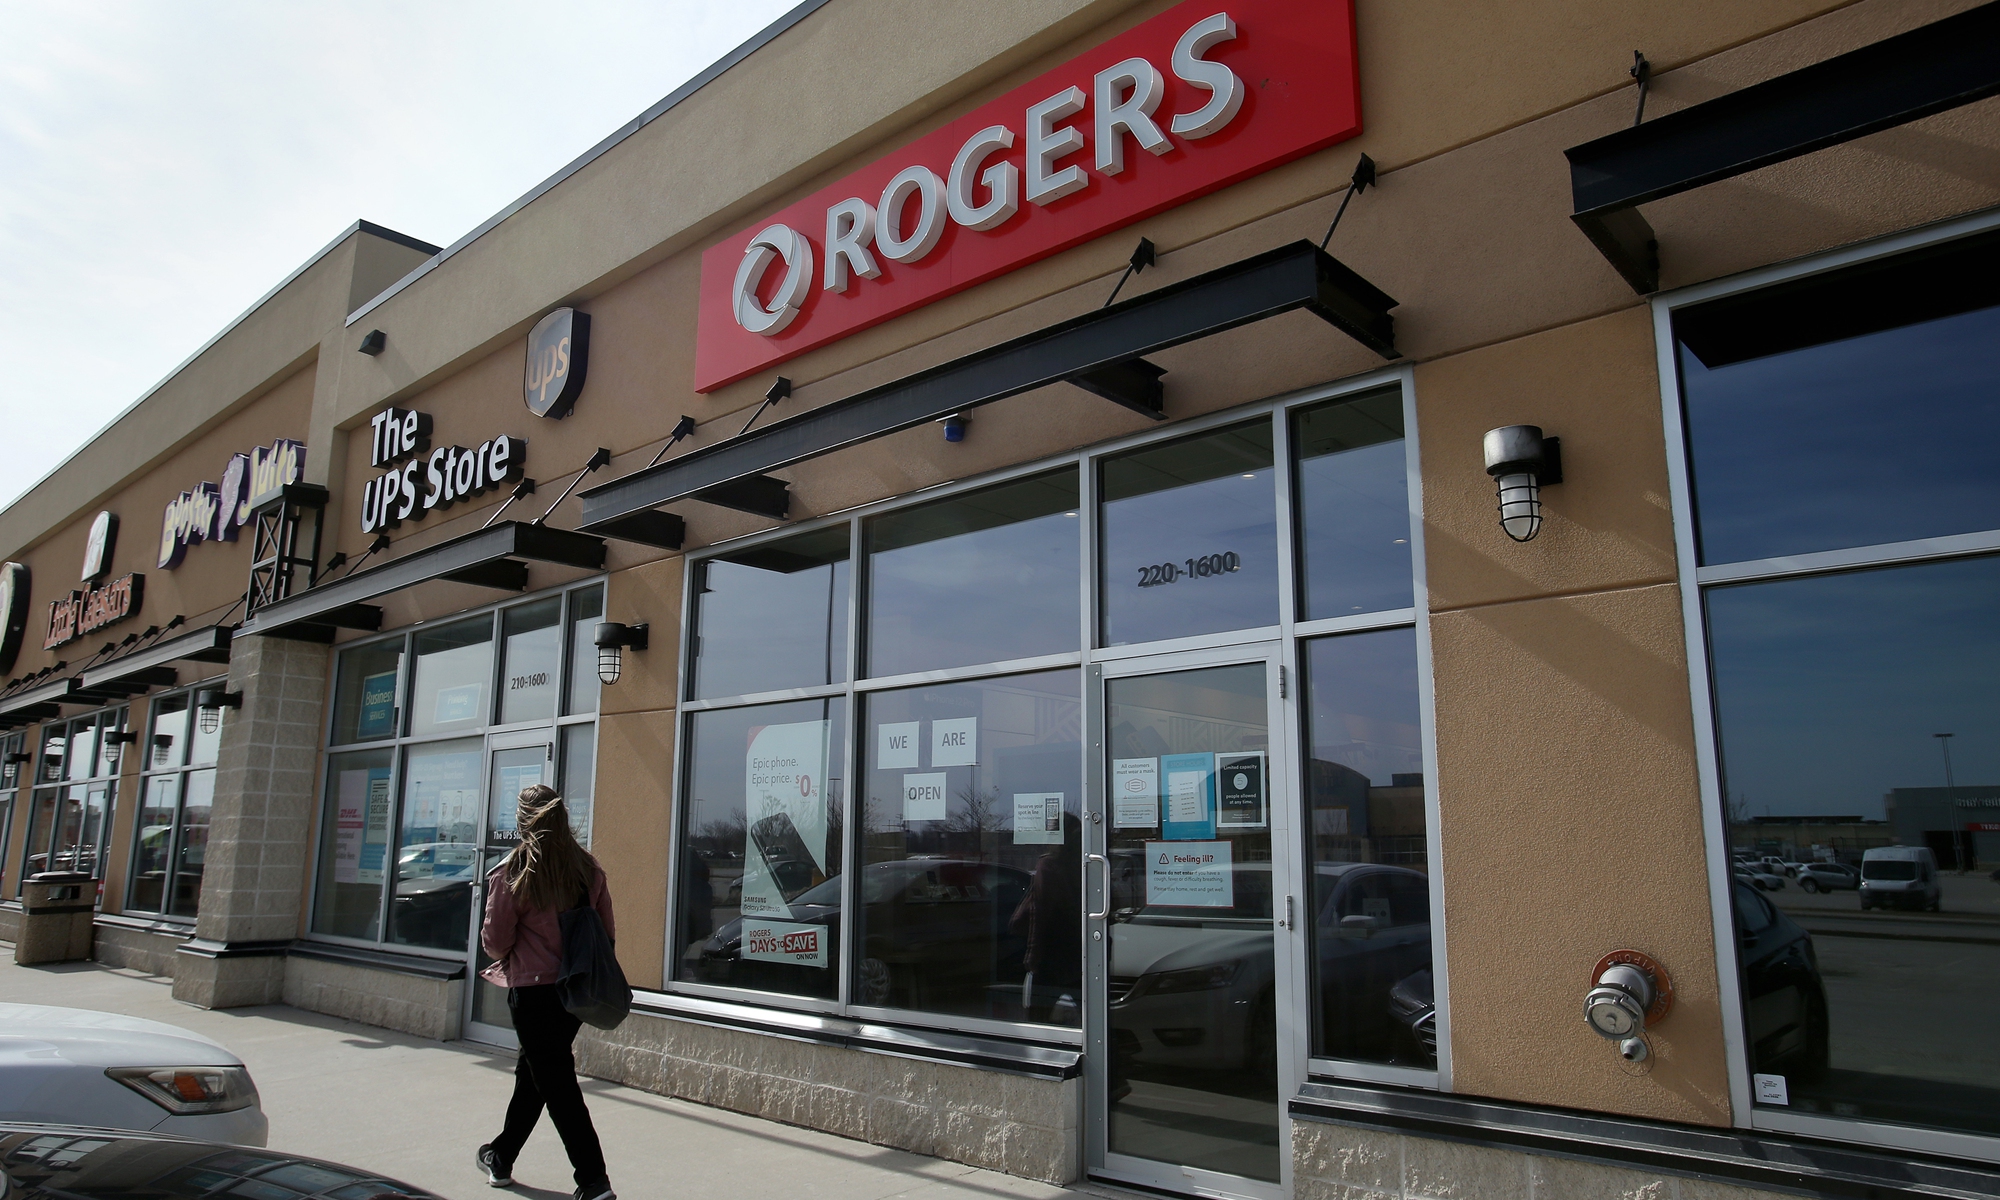 A pedestrian walks past a Rogers store in Winnipeg, Manitoba, Canada, on Monday. Photo: VCG